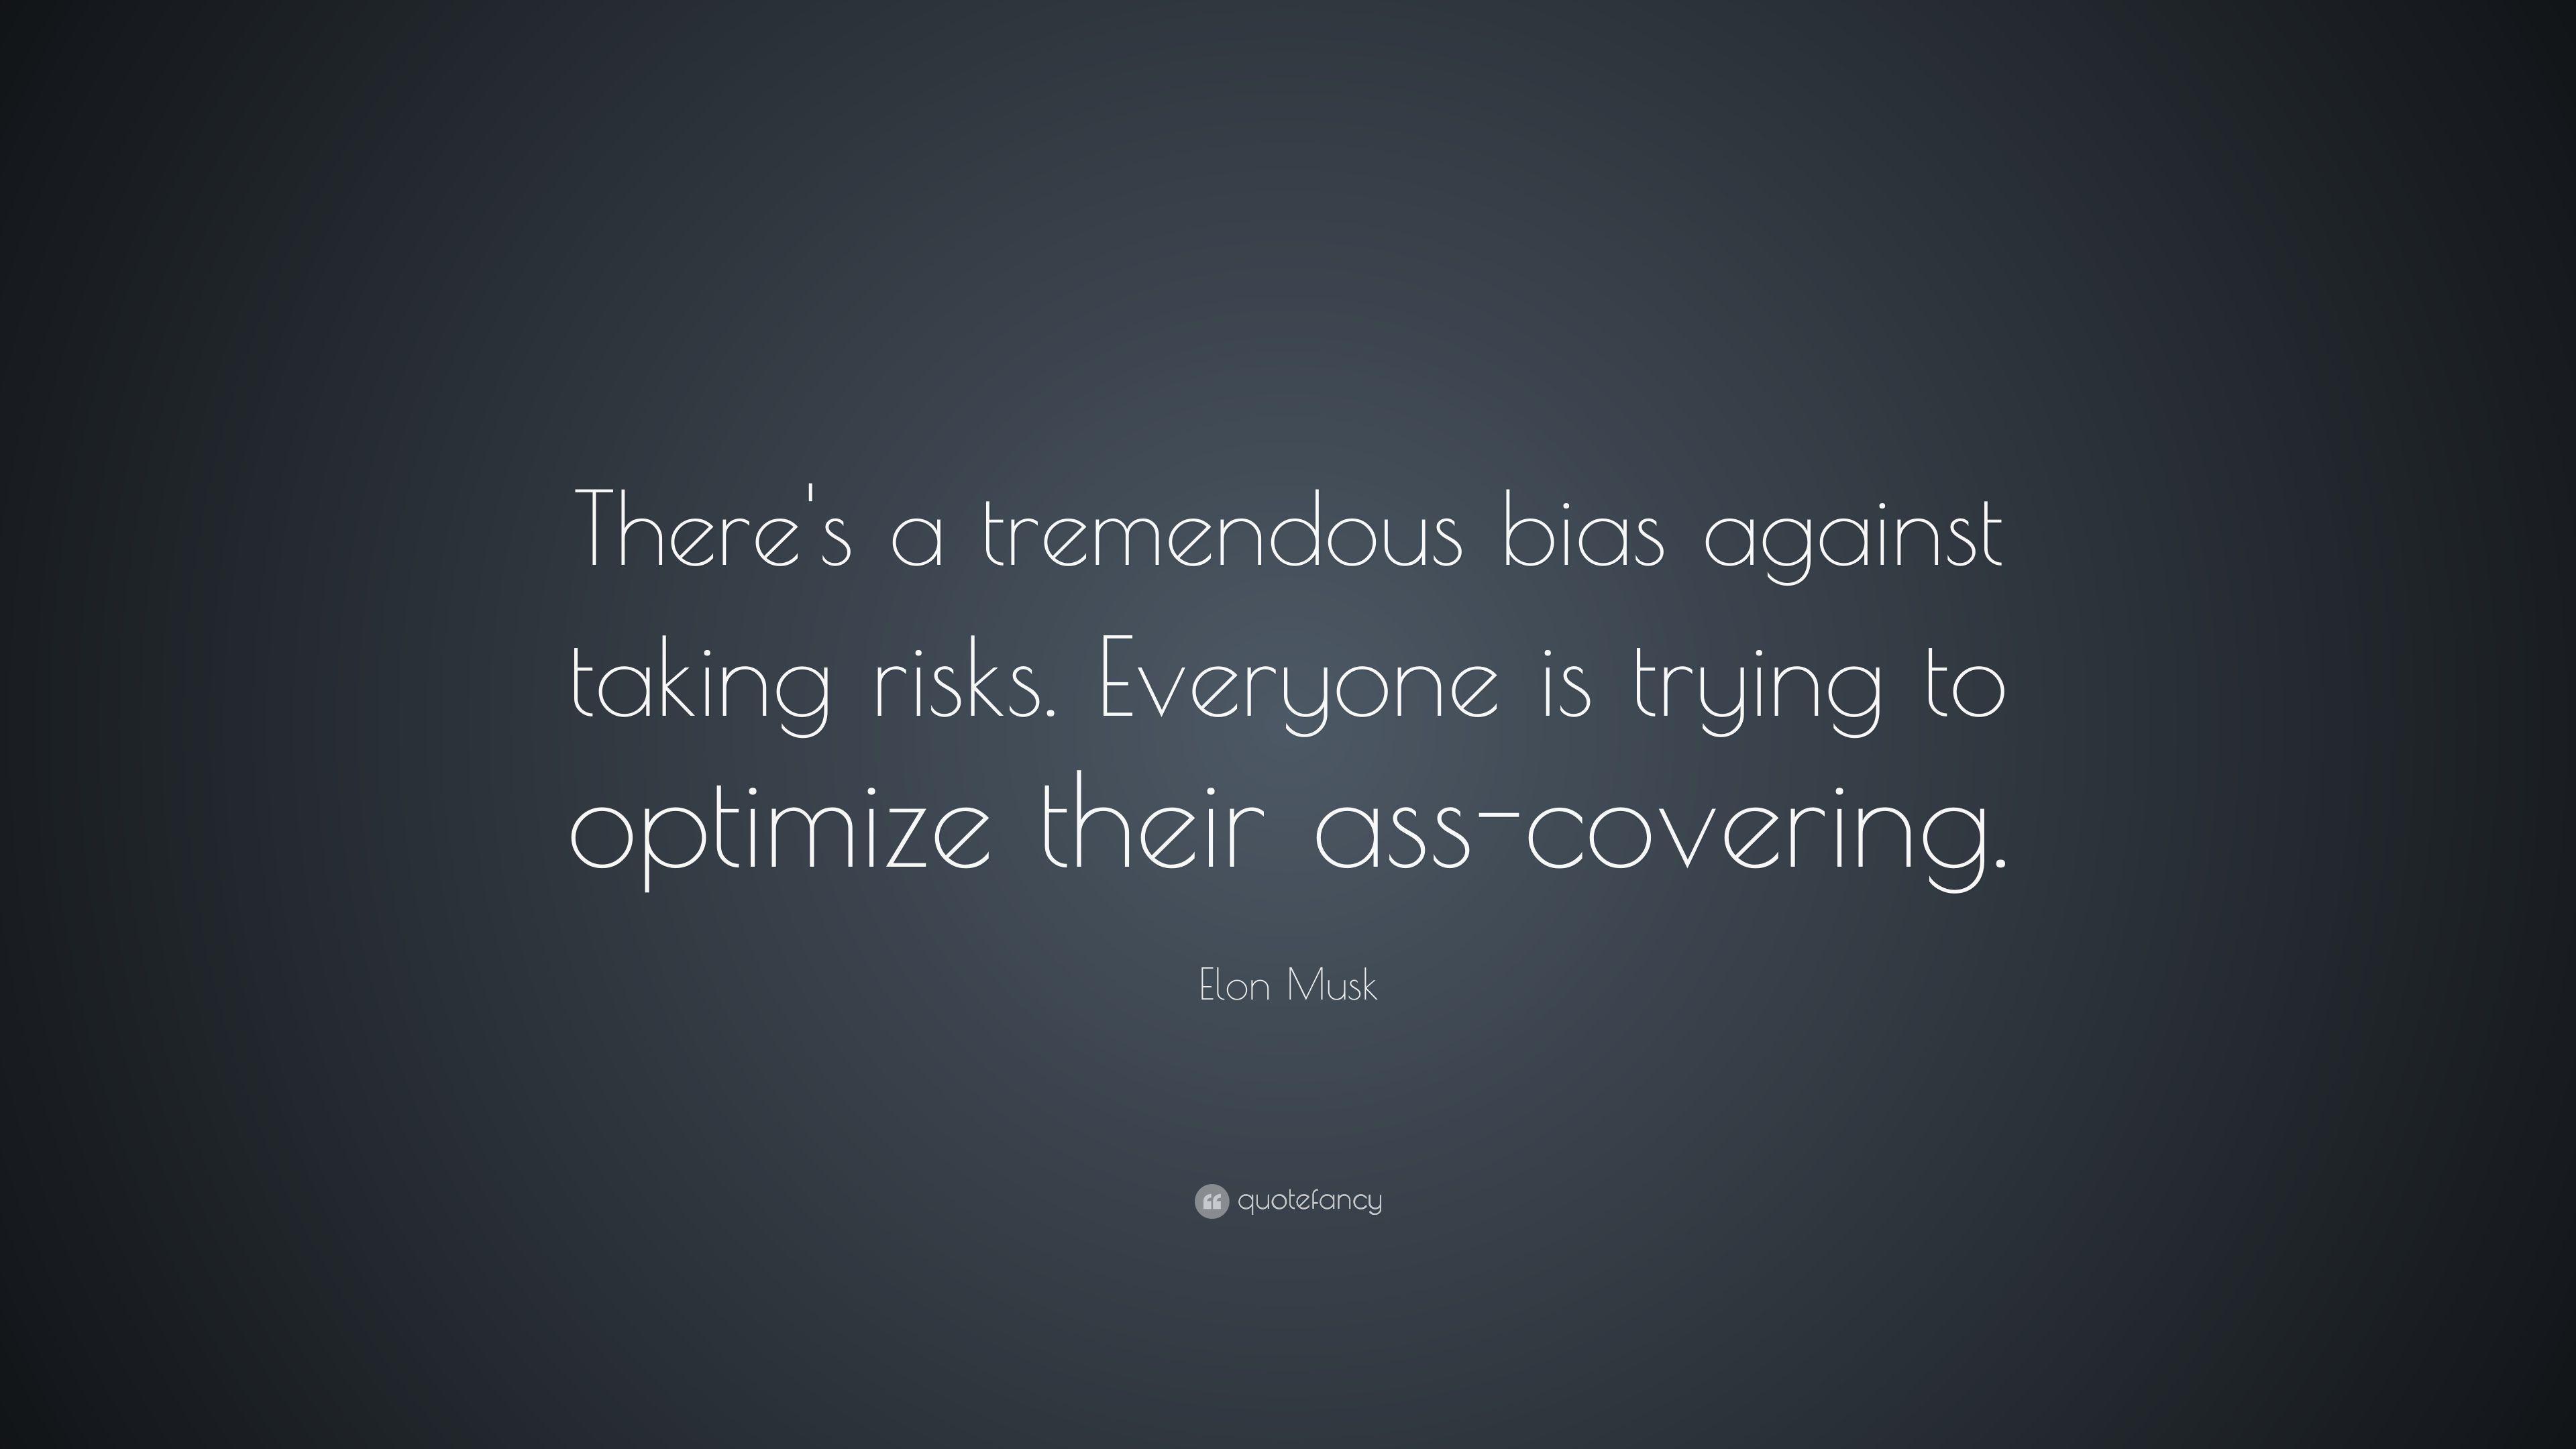 Elon Musk Quote: “There's a tremendous bias against taking risks